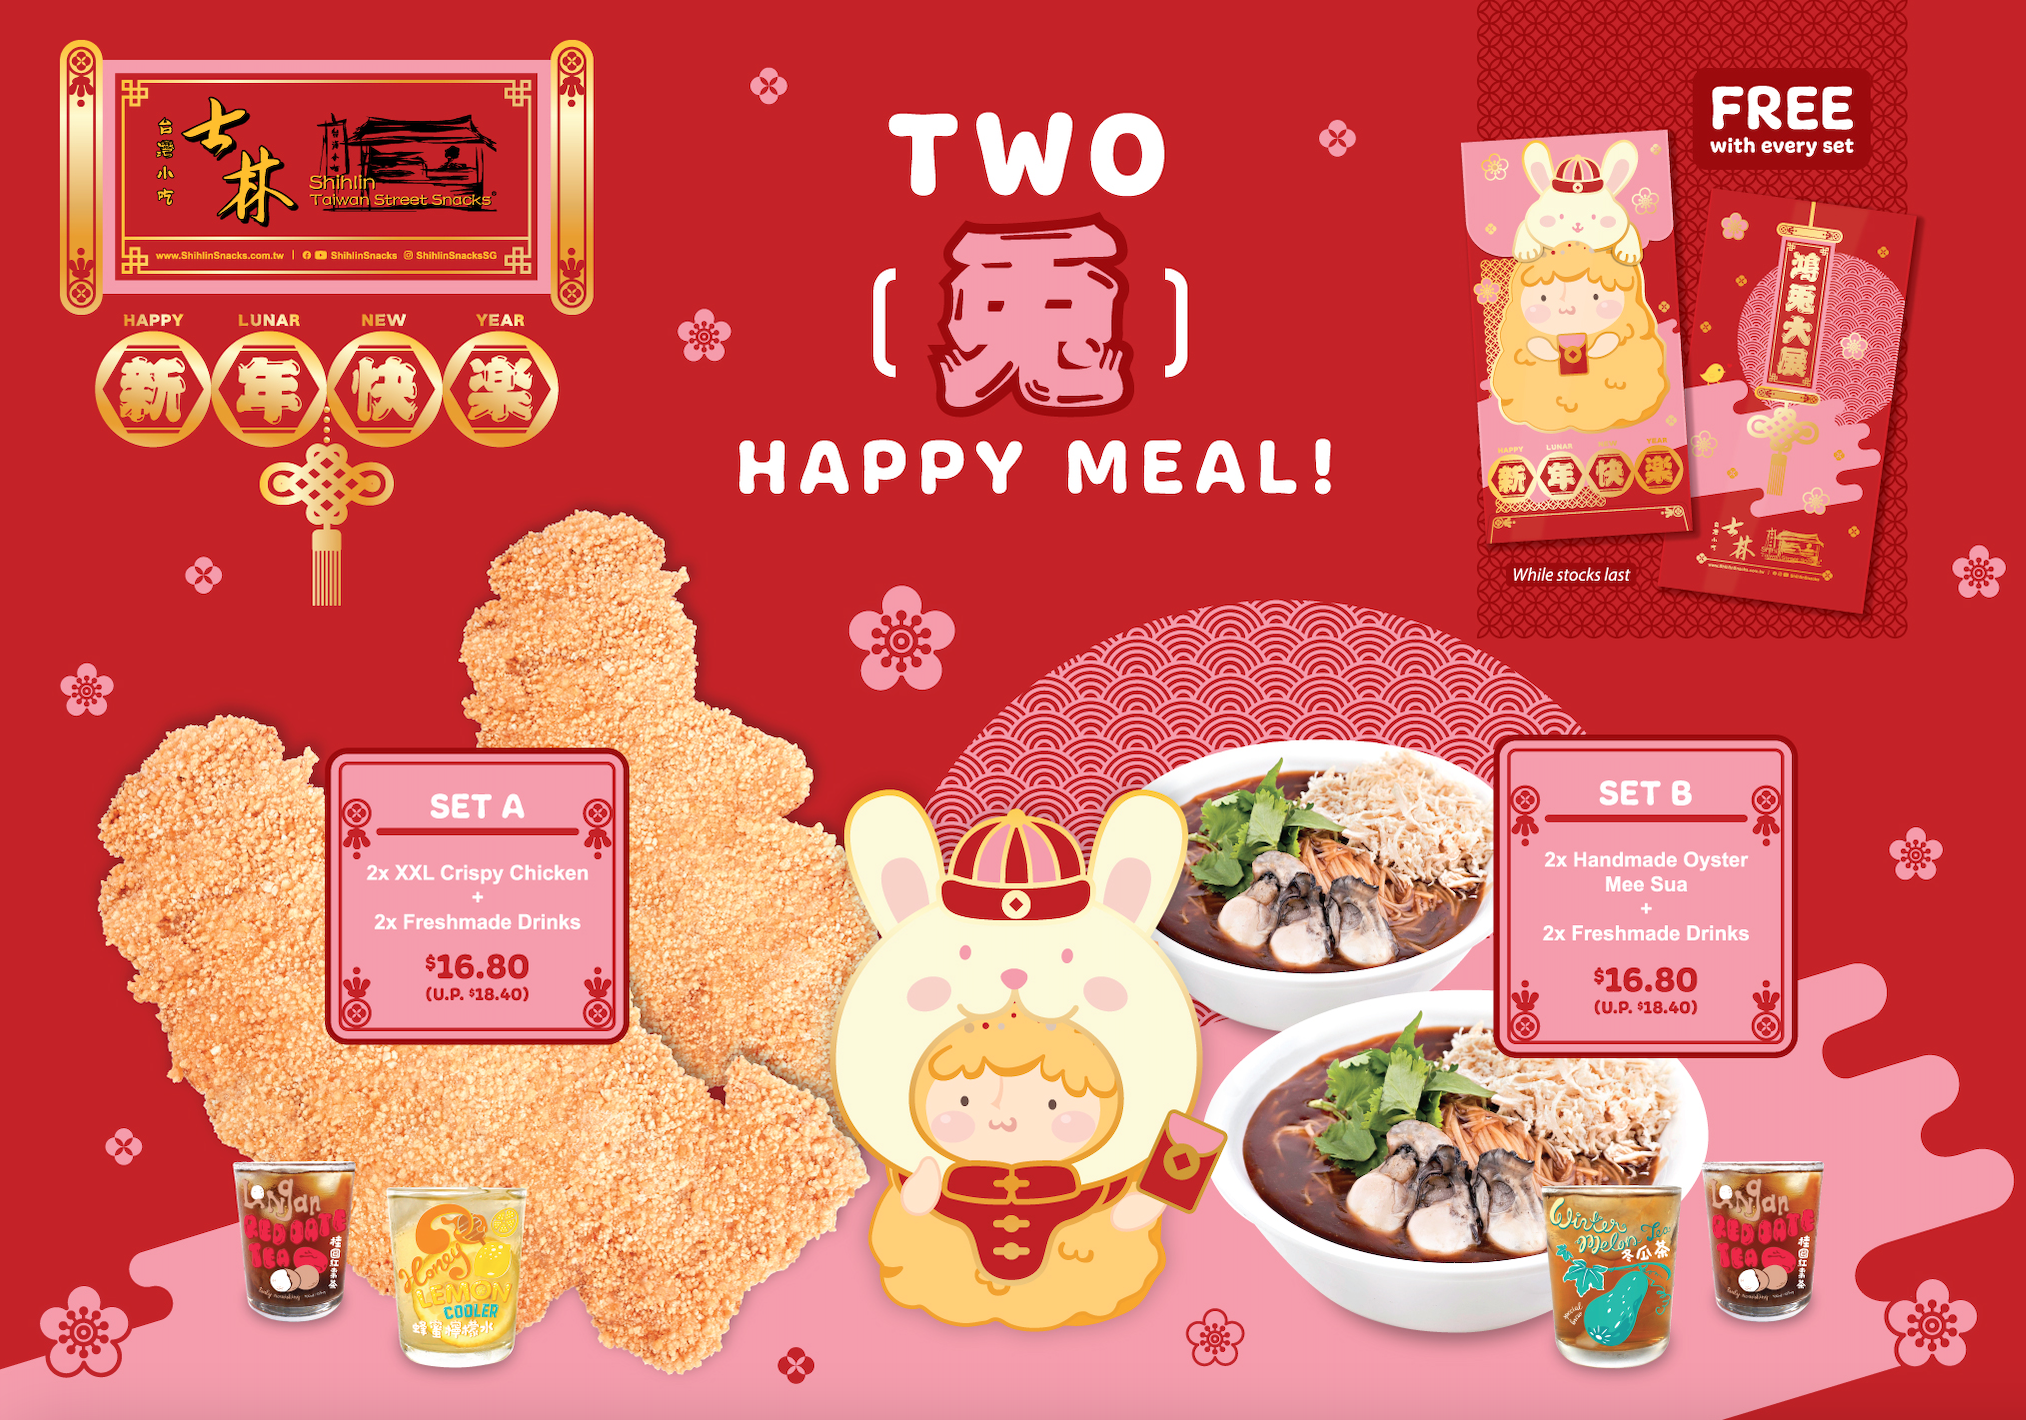 Lobang: MORE THAN 50 CNY 2023 F&B Deals - Your one stop guide to Yusheng, Pen Cai, Set Menus and more this Lunar New Year! - 105